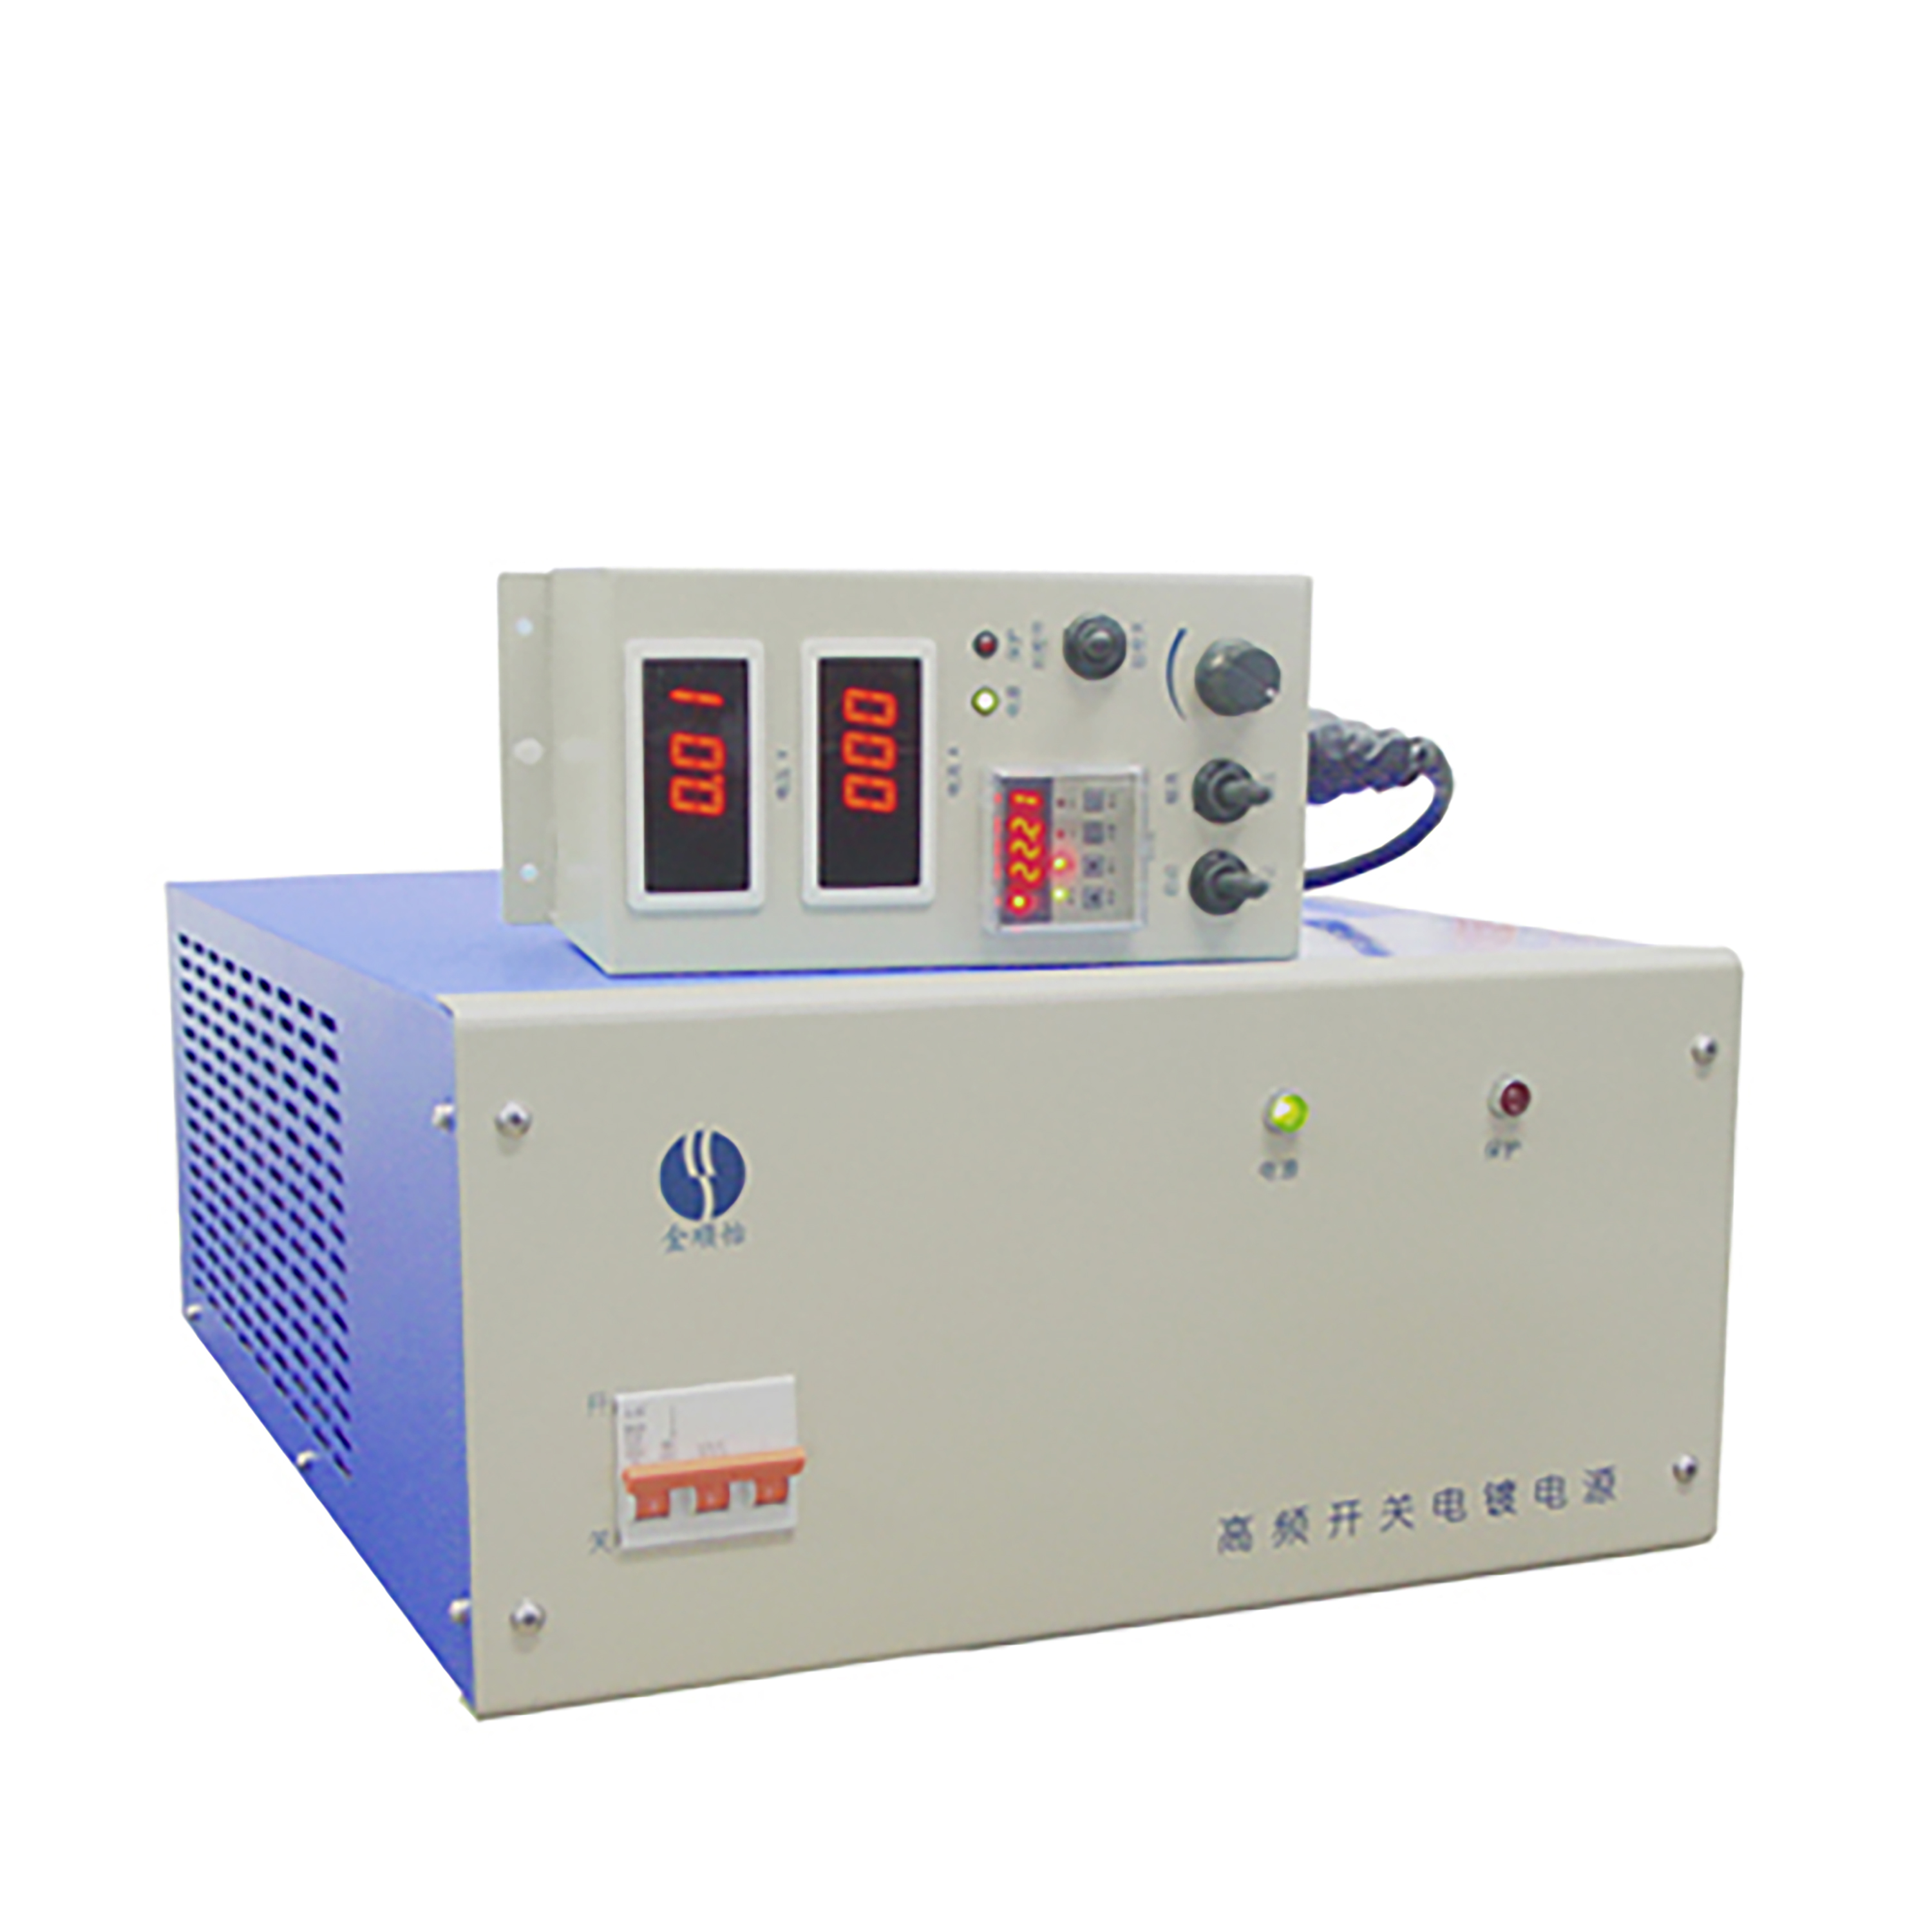 DC Rectifiers 500A -POWER STATION